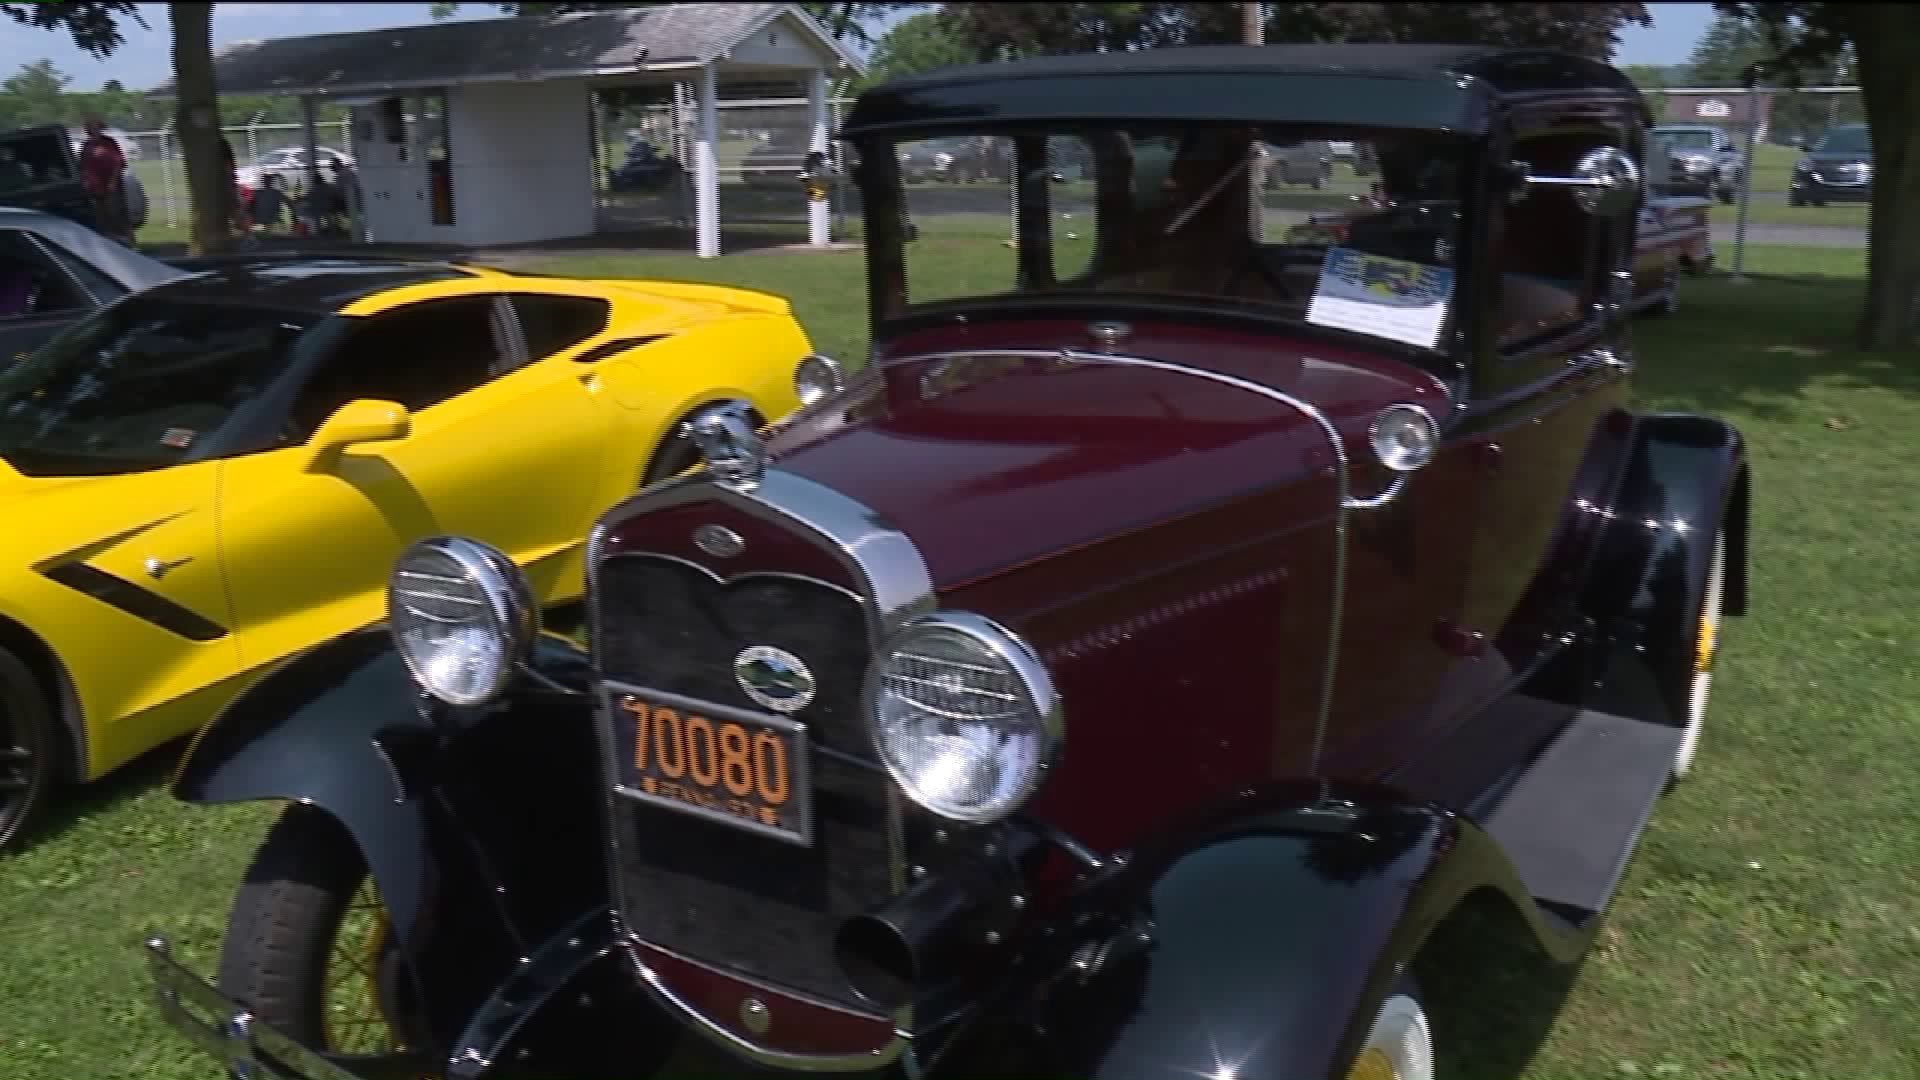 Car Show Benefits Meals on Wheels